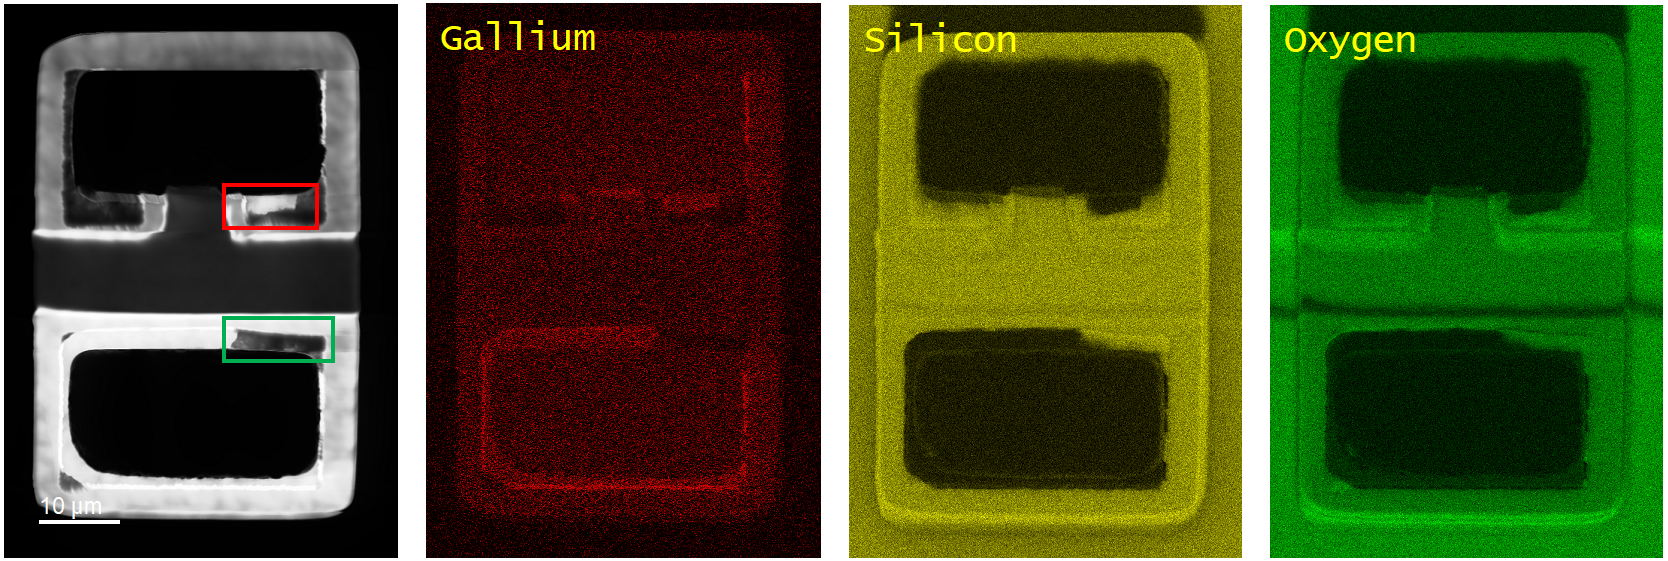 (left) Unfiltered CL image and EDS material composition results of a defect LED. EDS material mapping for gallium (red), silicon (yellow), and oxygen (green).